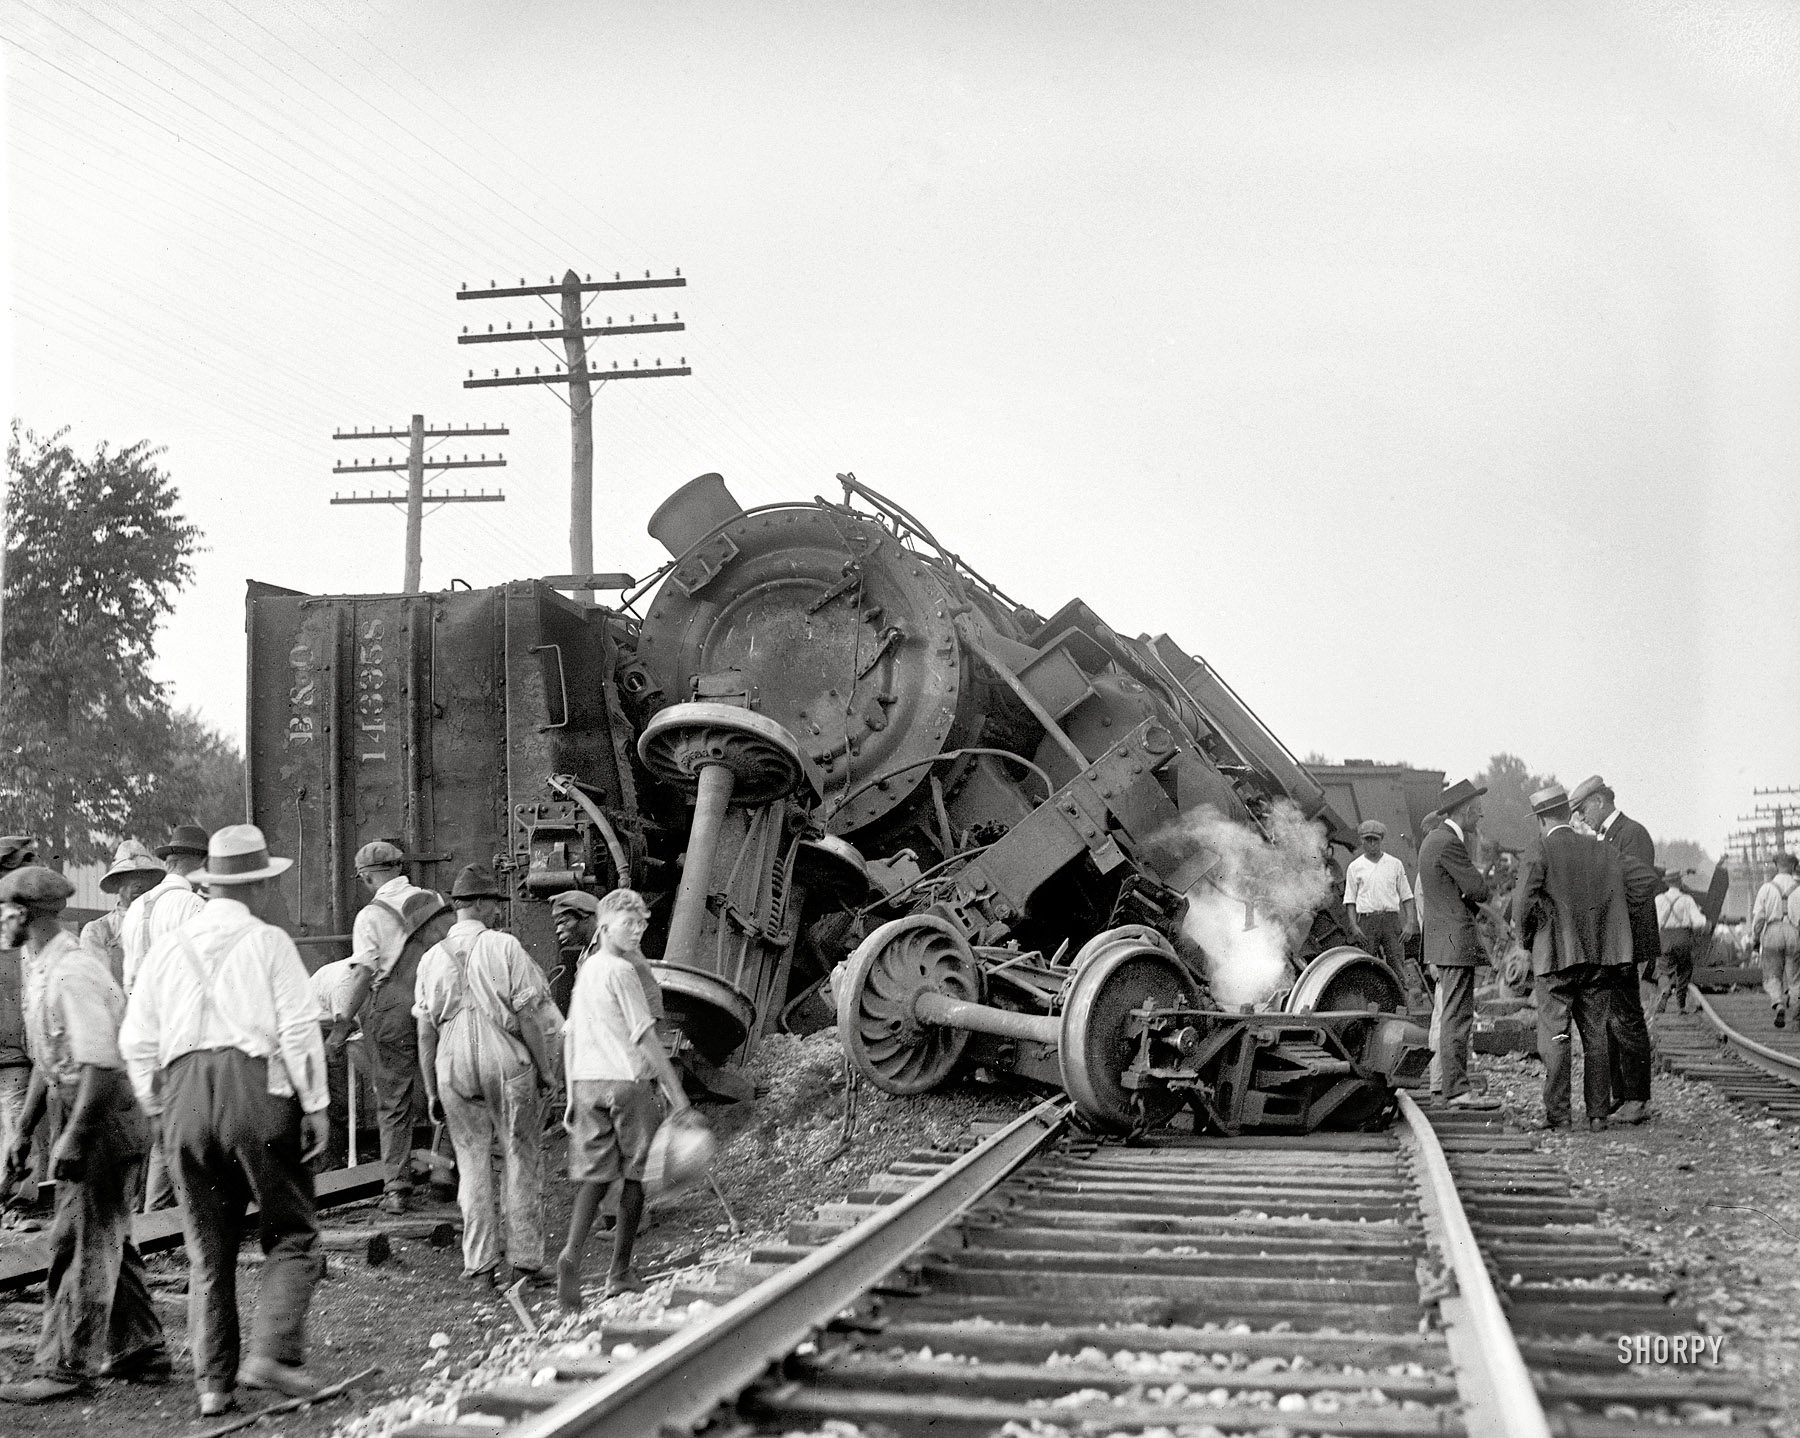 Laurel, Maryland. July 31, 1922. "Two B&O freights wrecked in head-on crash at Laurel switch." National Photo Company glass negative. View full size.